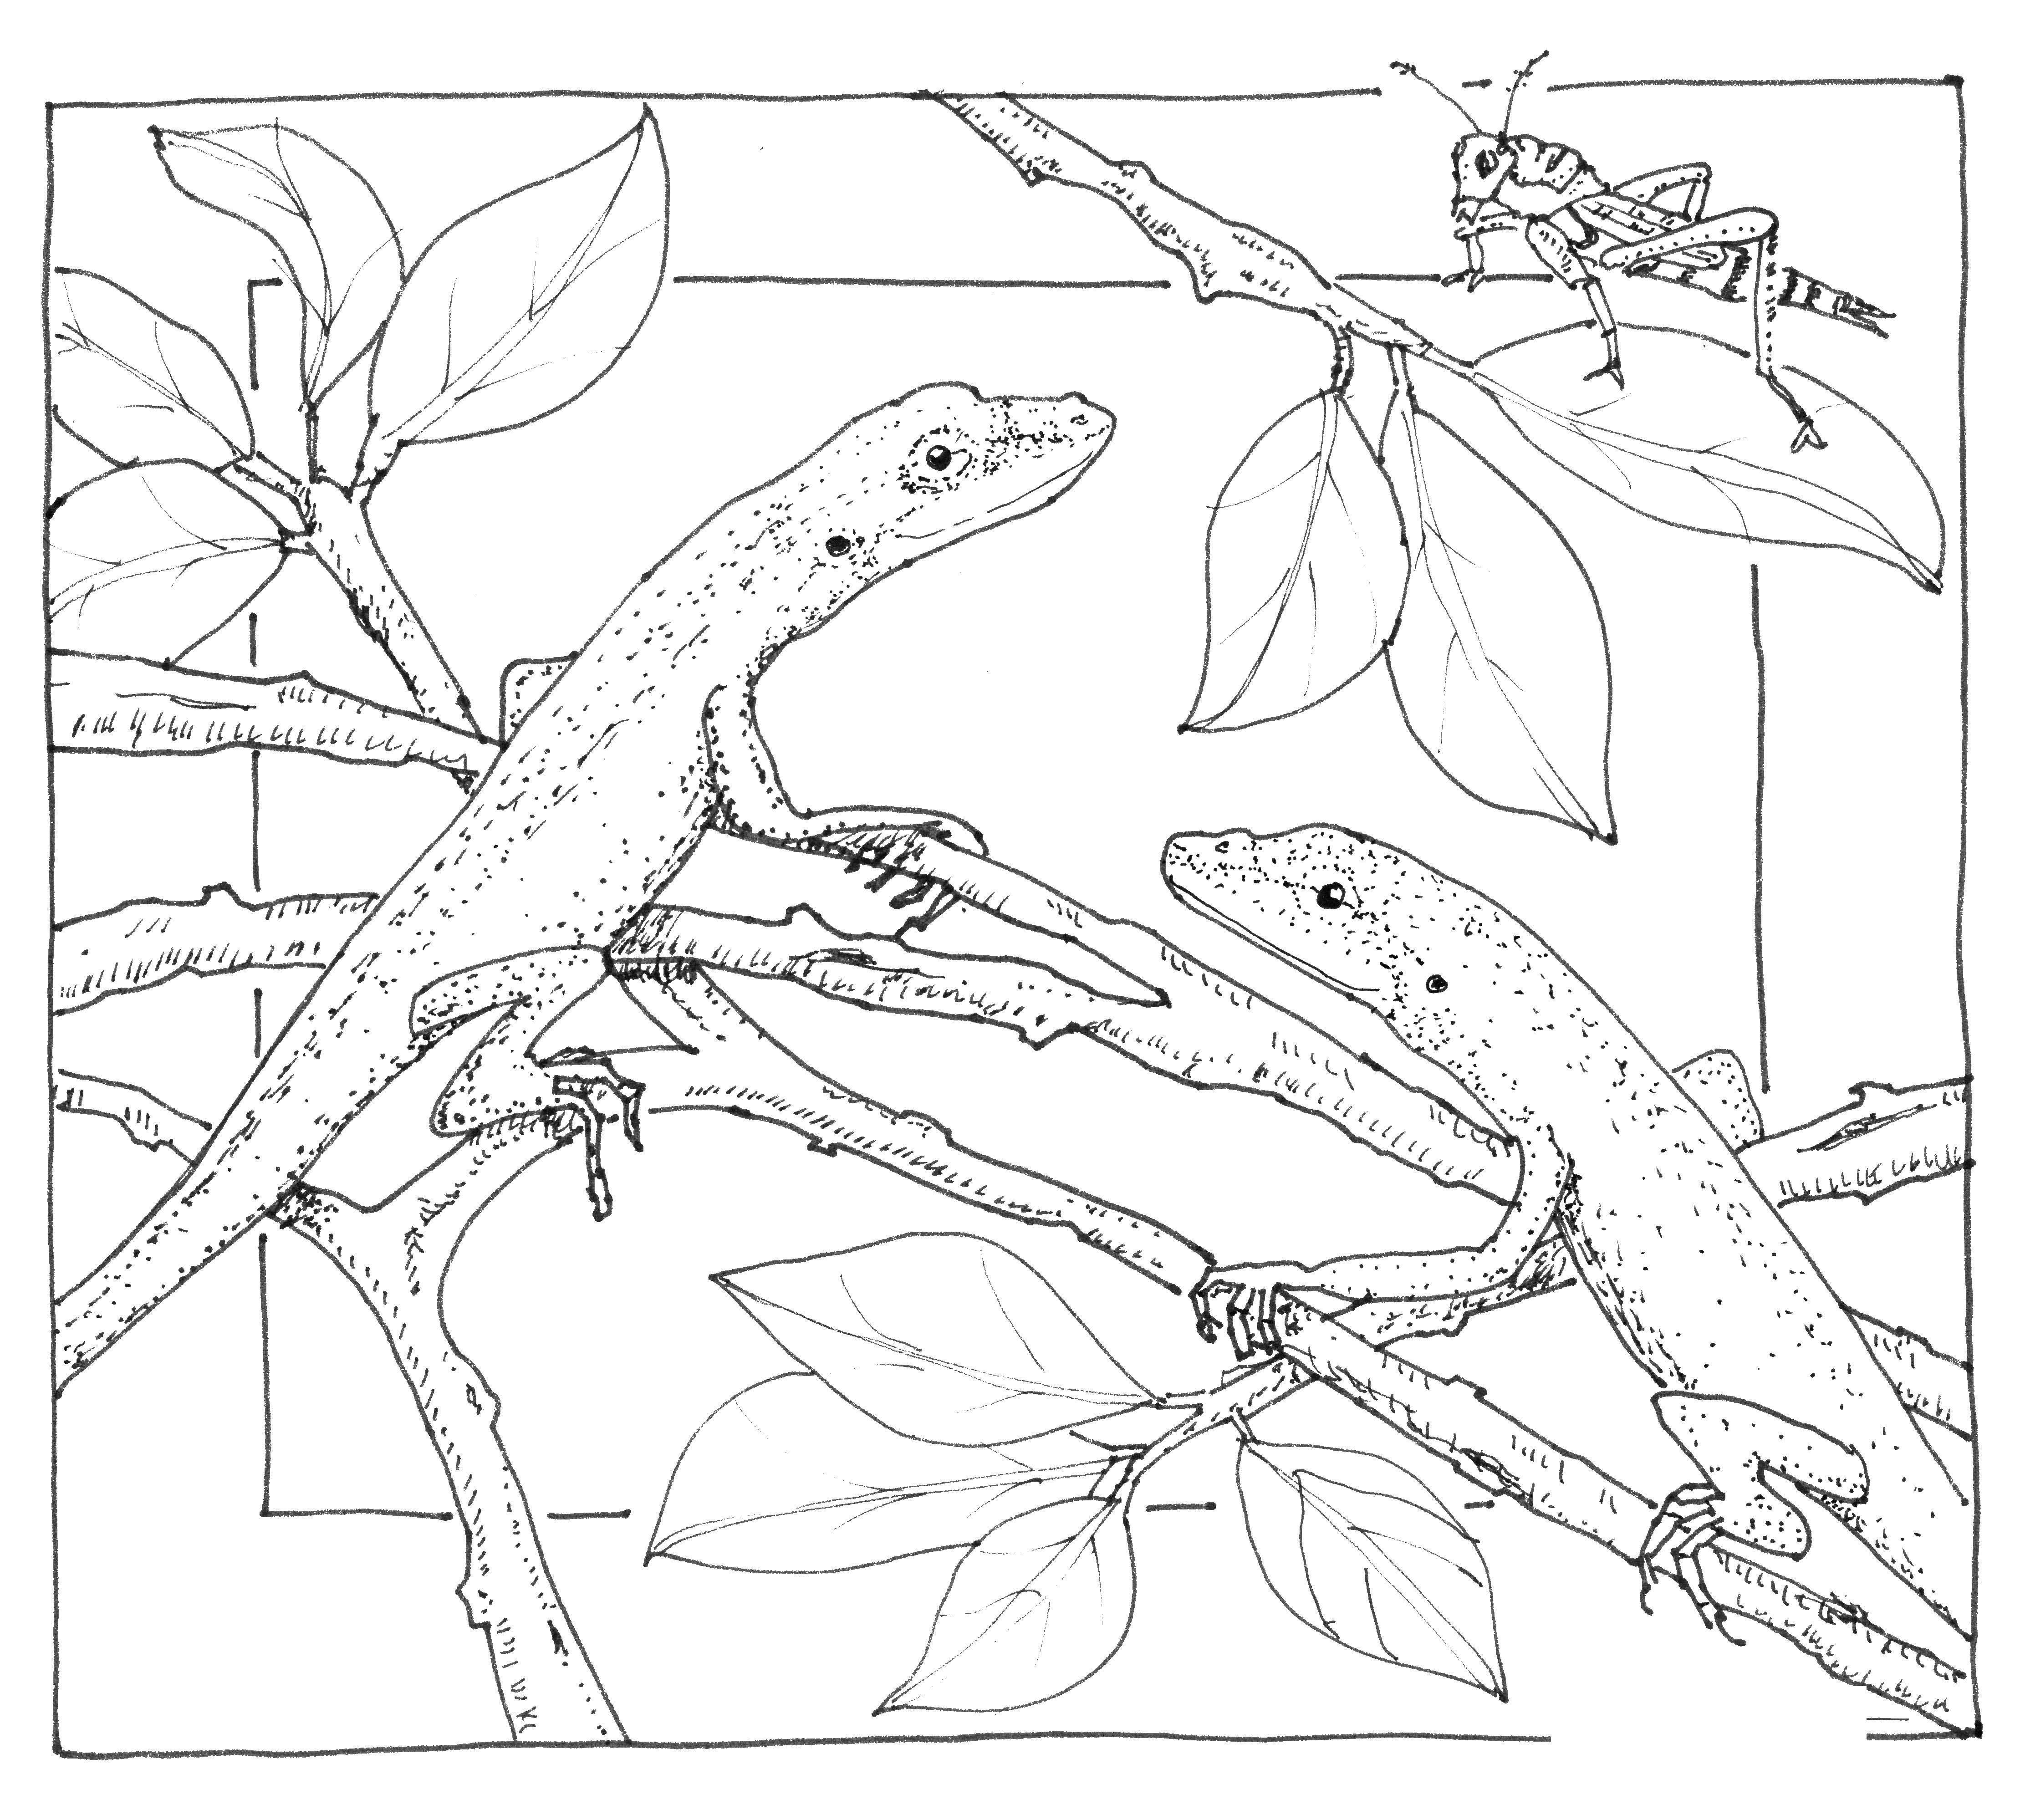 Coloring Lizard on a branch. Category Animals. Tags:  animals, lizard.